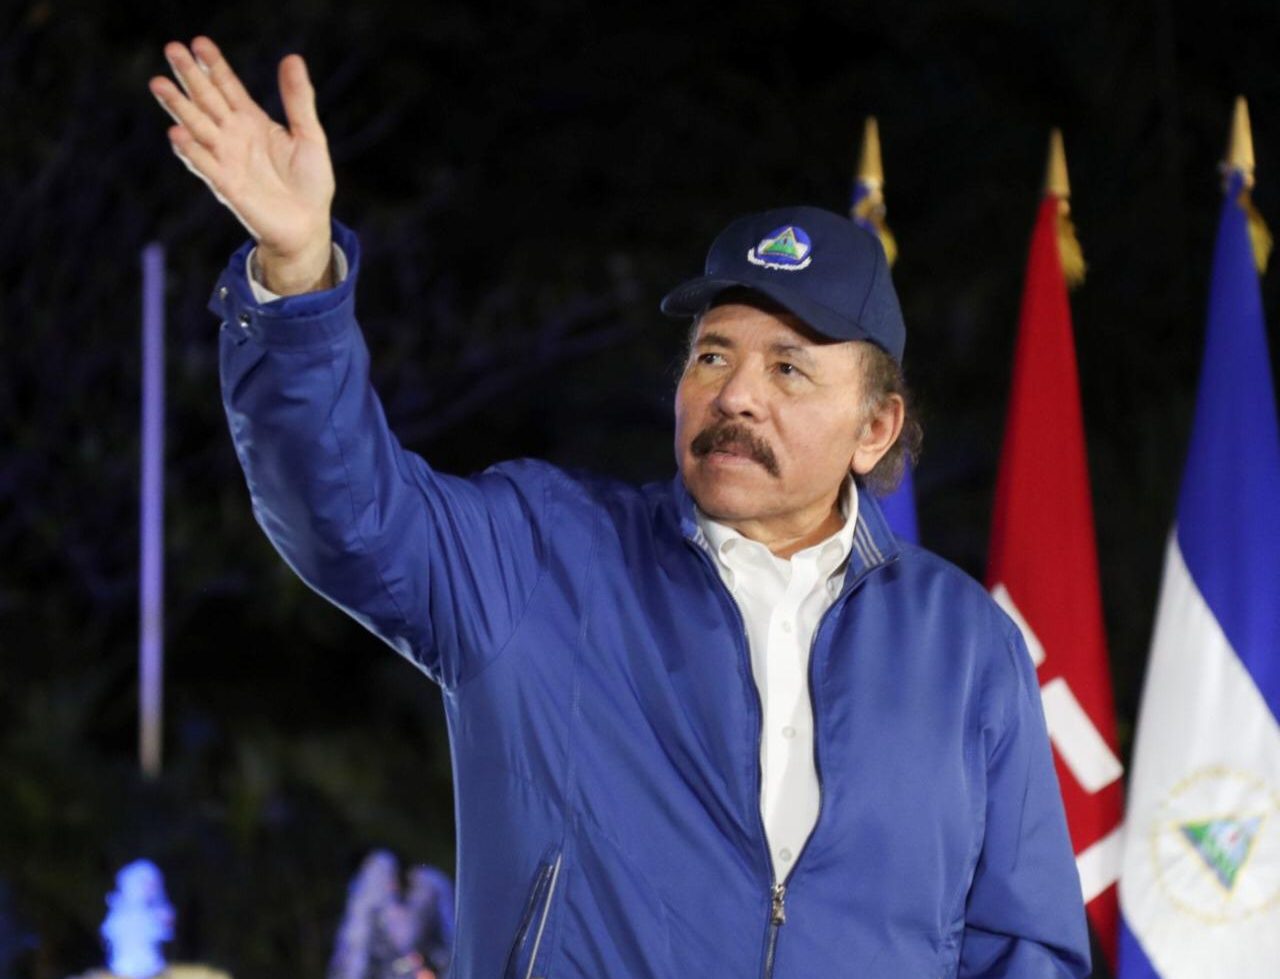 Ortega drags Nicaragua down a "dark path" in his attempt to create a single party